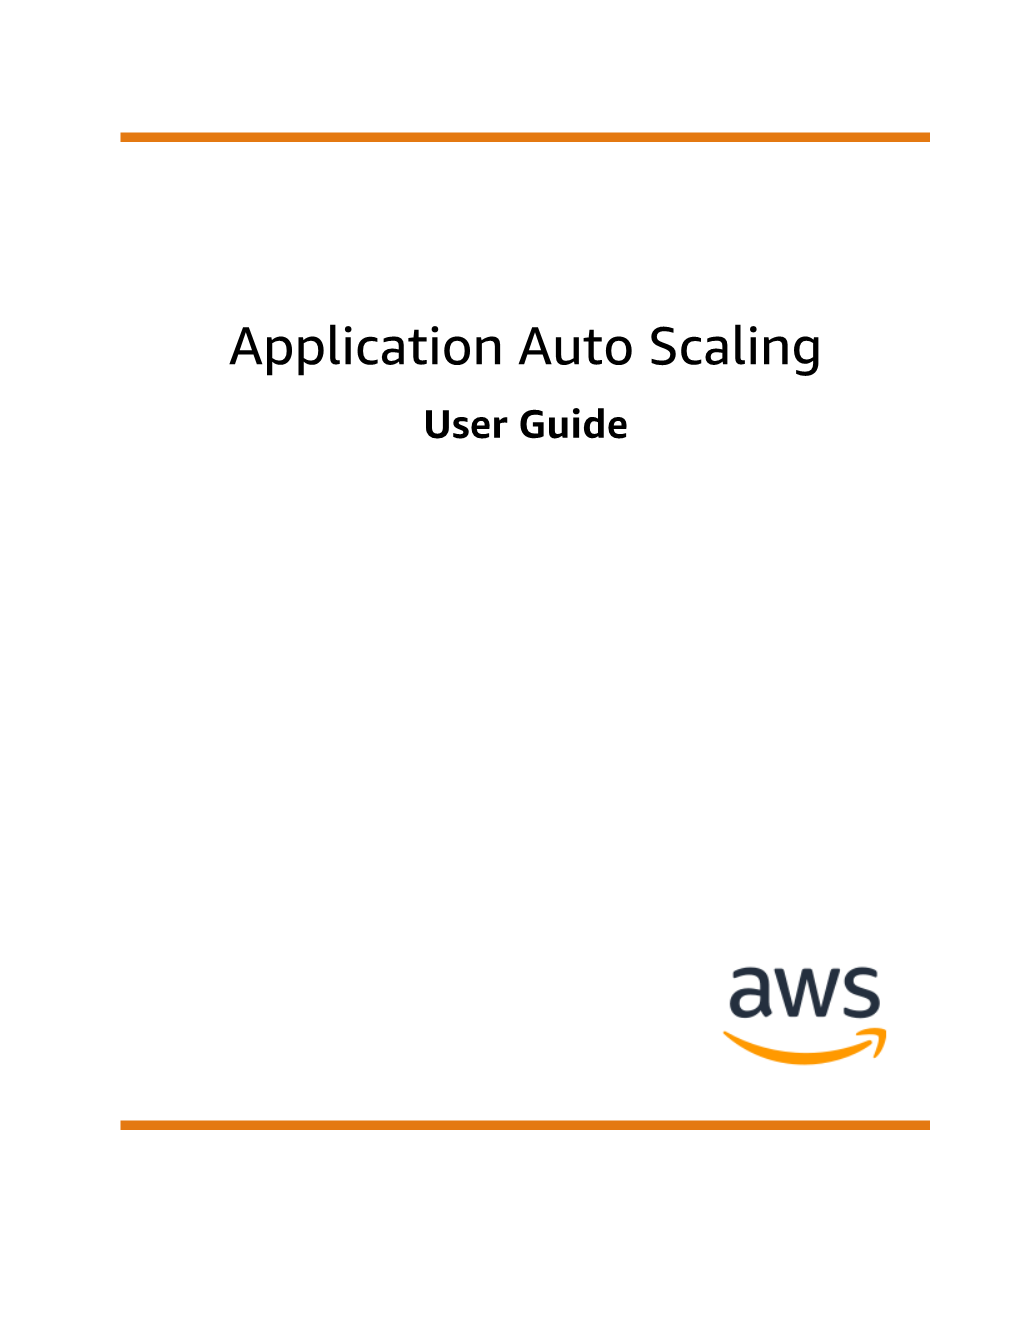 Application Auto Scaling User Guide Application Auto Scaling User Guide